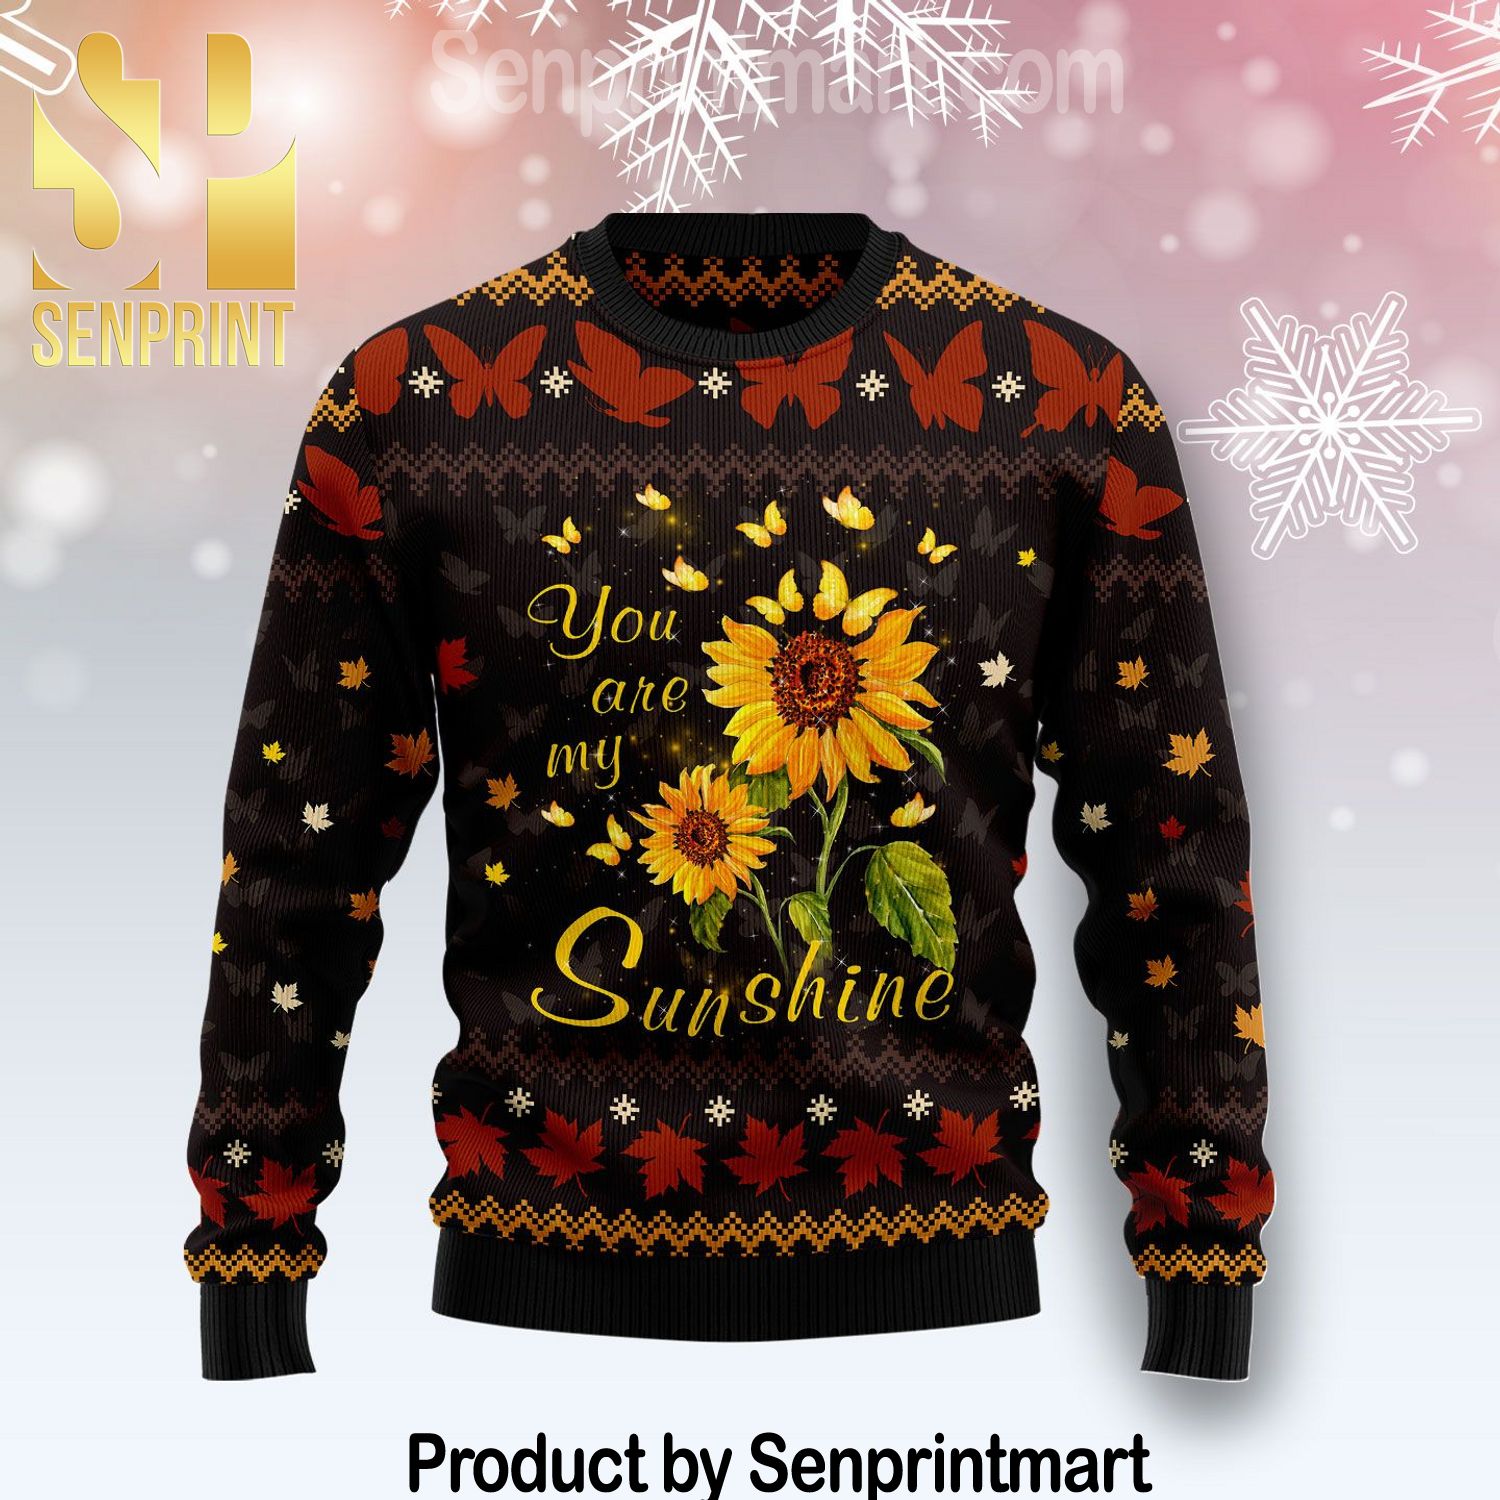 Butterfly Sunshine Wool Blend Ugly Knit Christmas Sweater